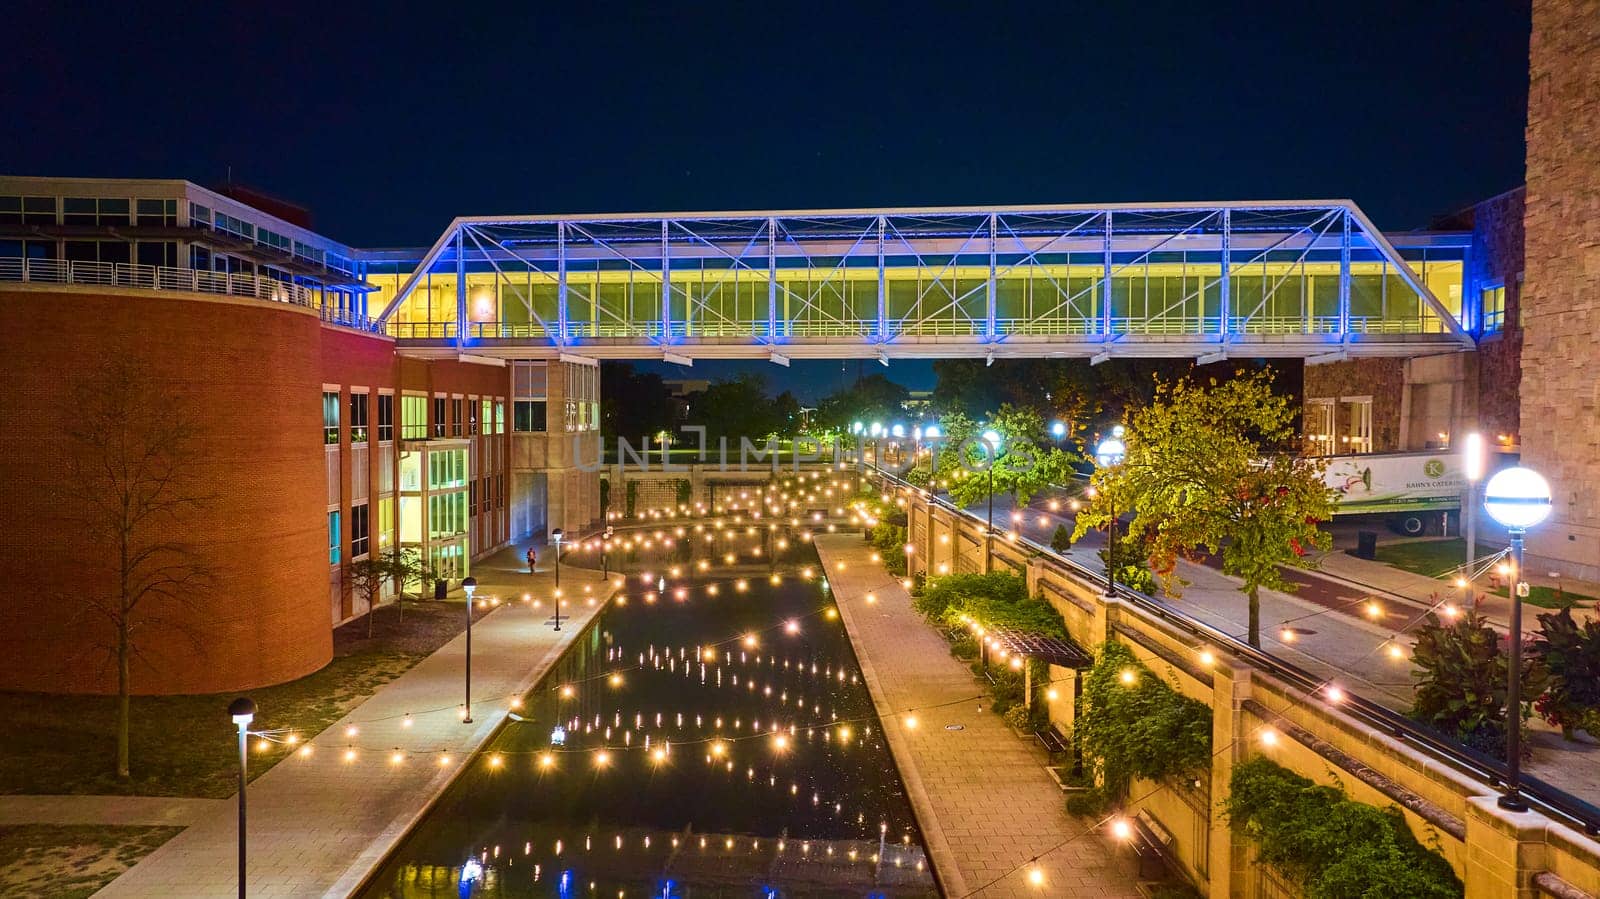 Aerial Modern Pedestrian Bridge and Walkway at Night, Indianapolis by njproductions